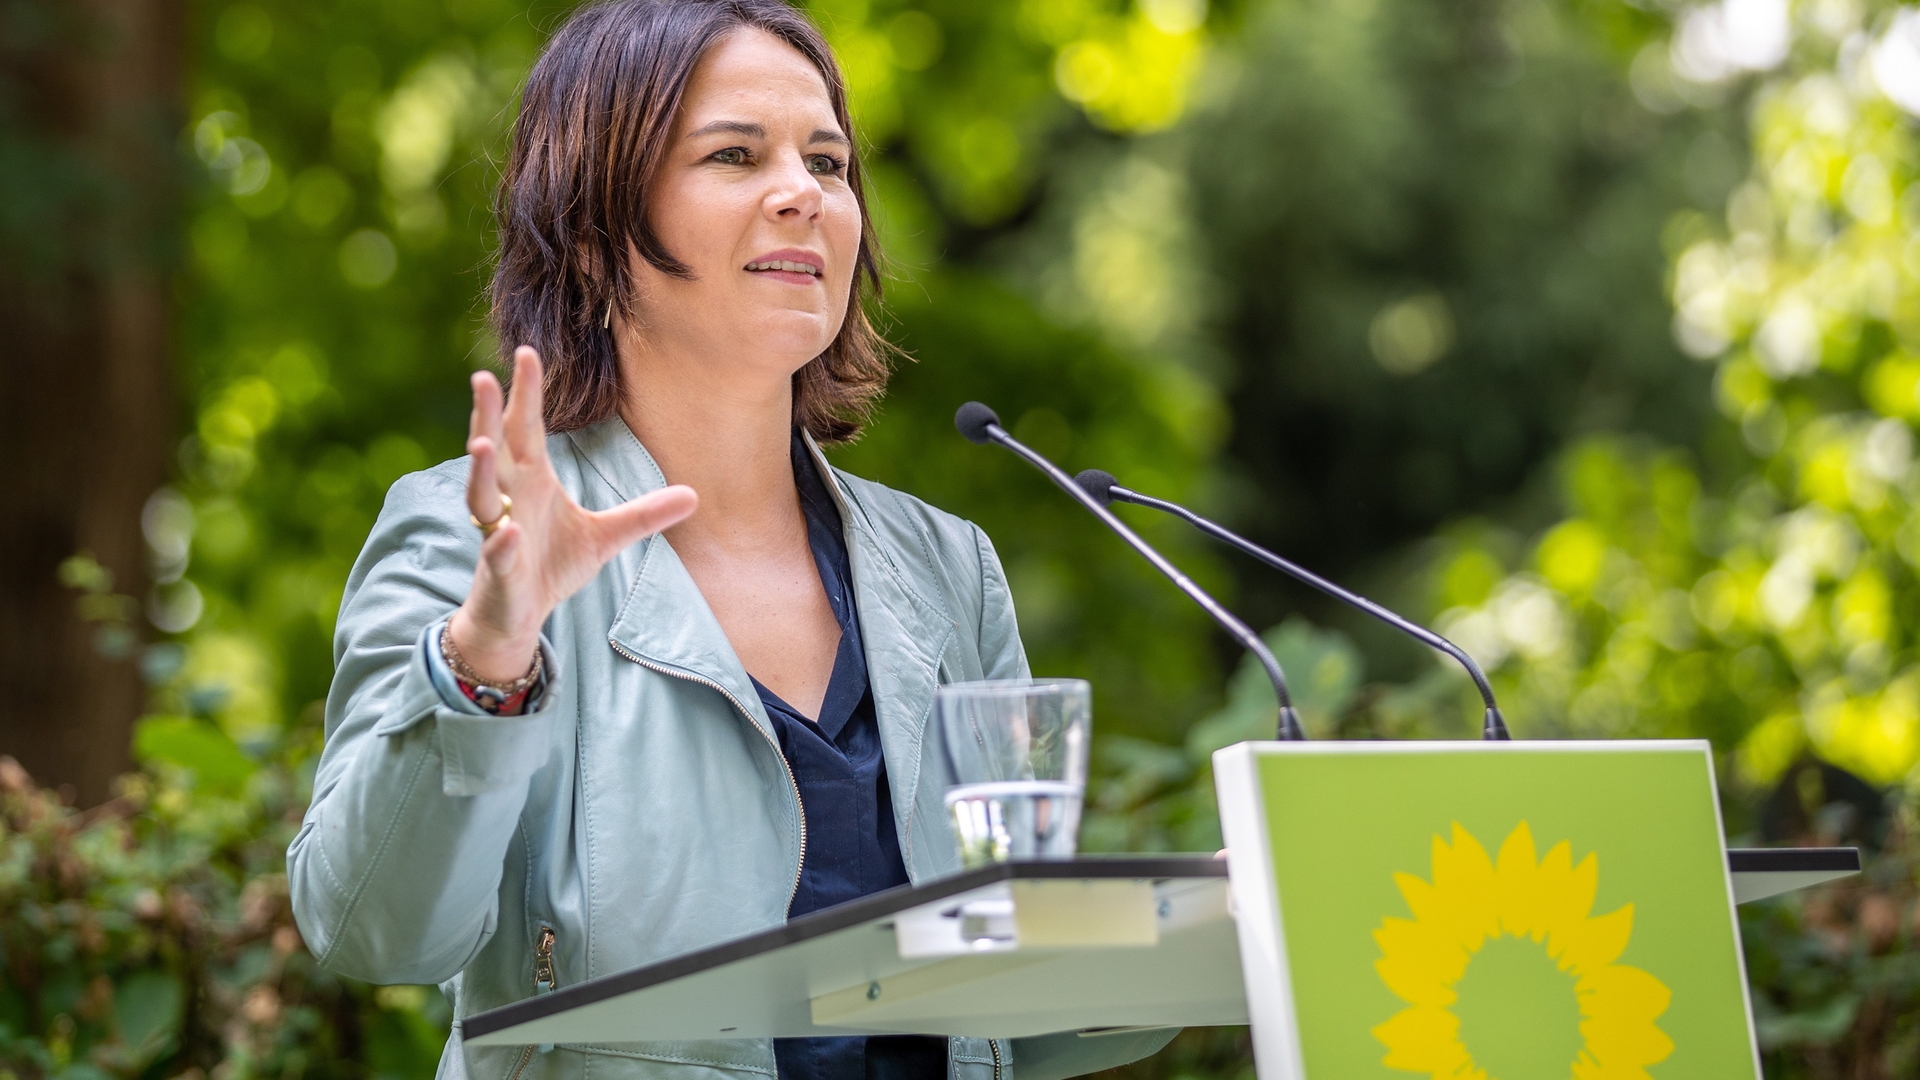 Germany: Presentation of the immediate climate program of the Green Party